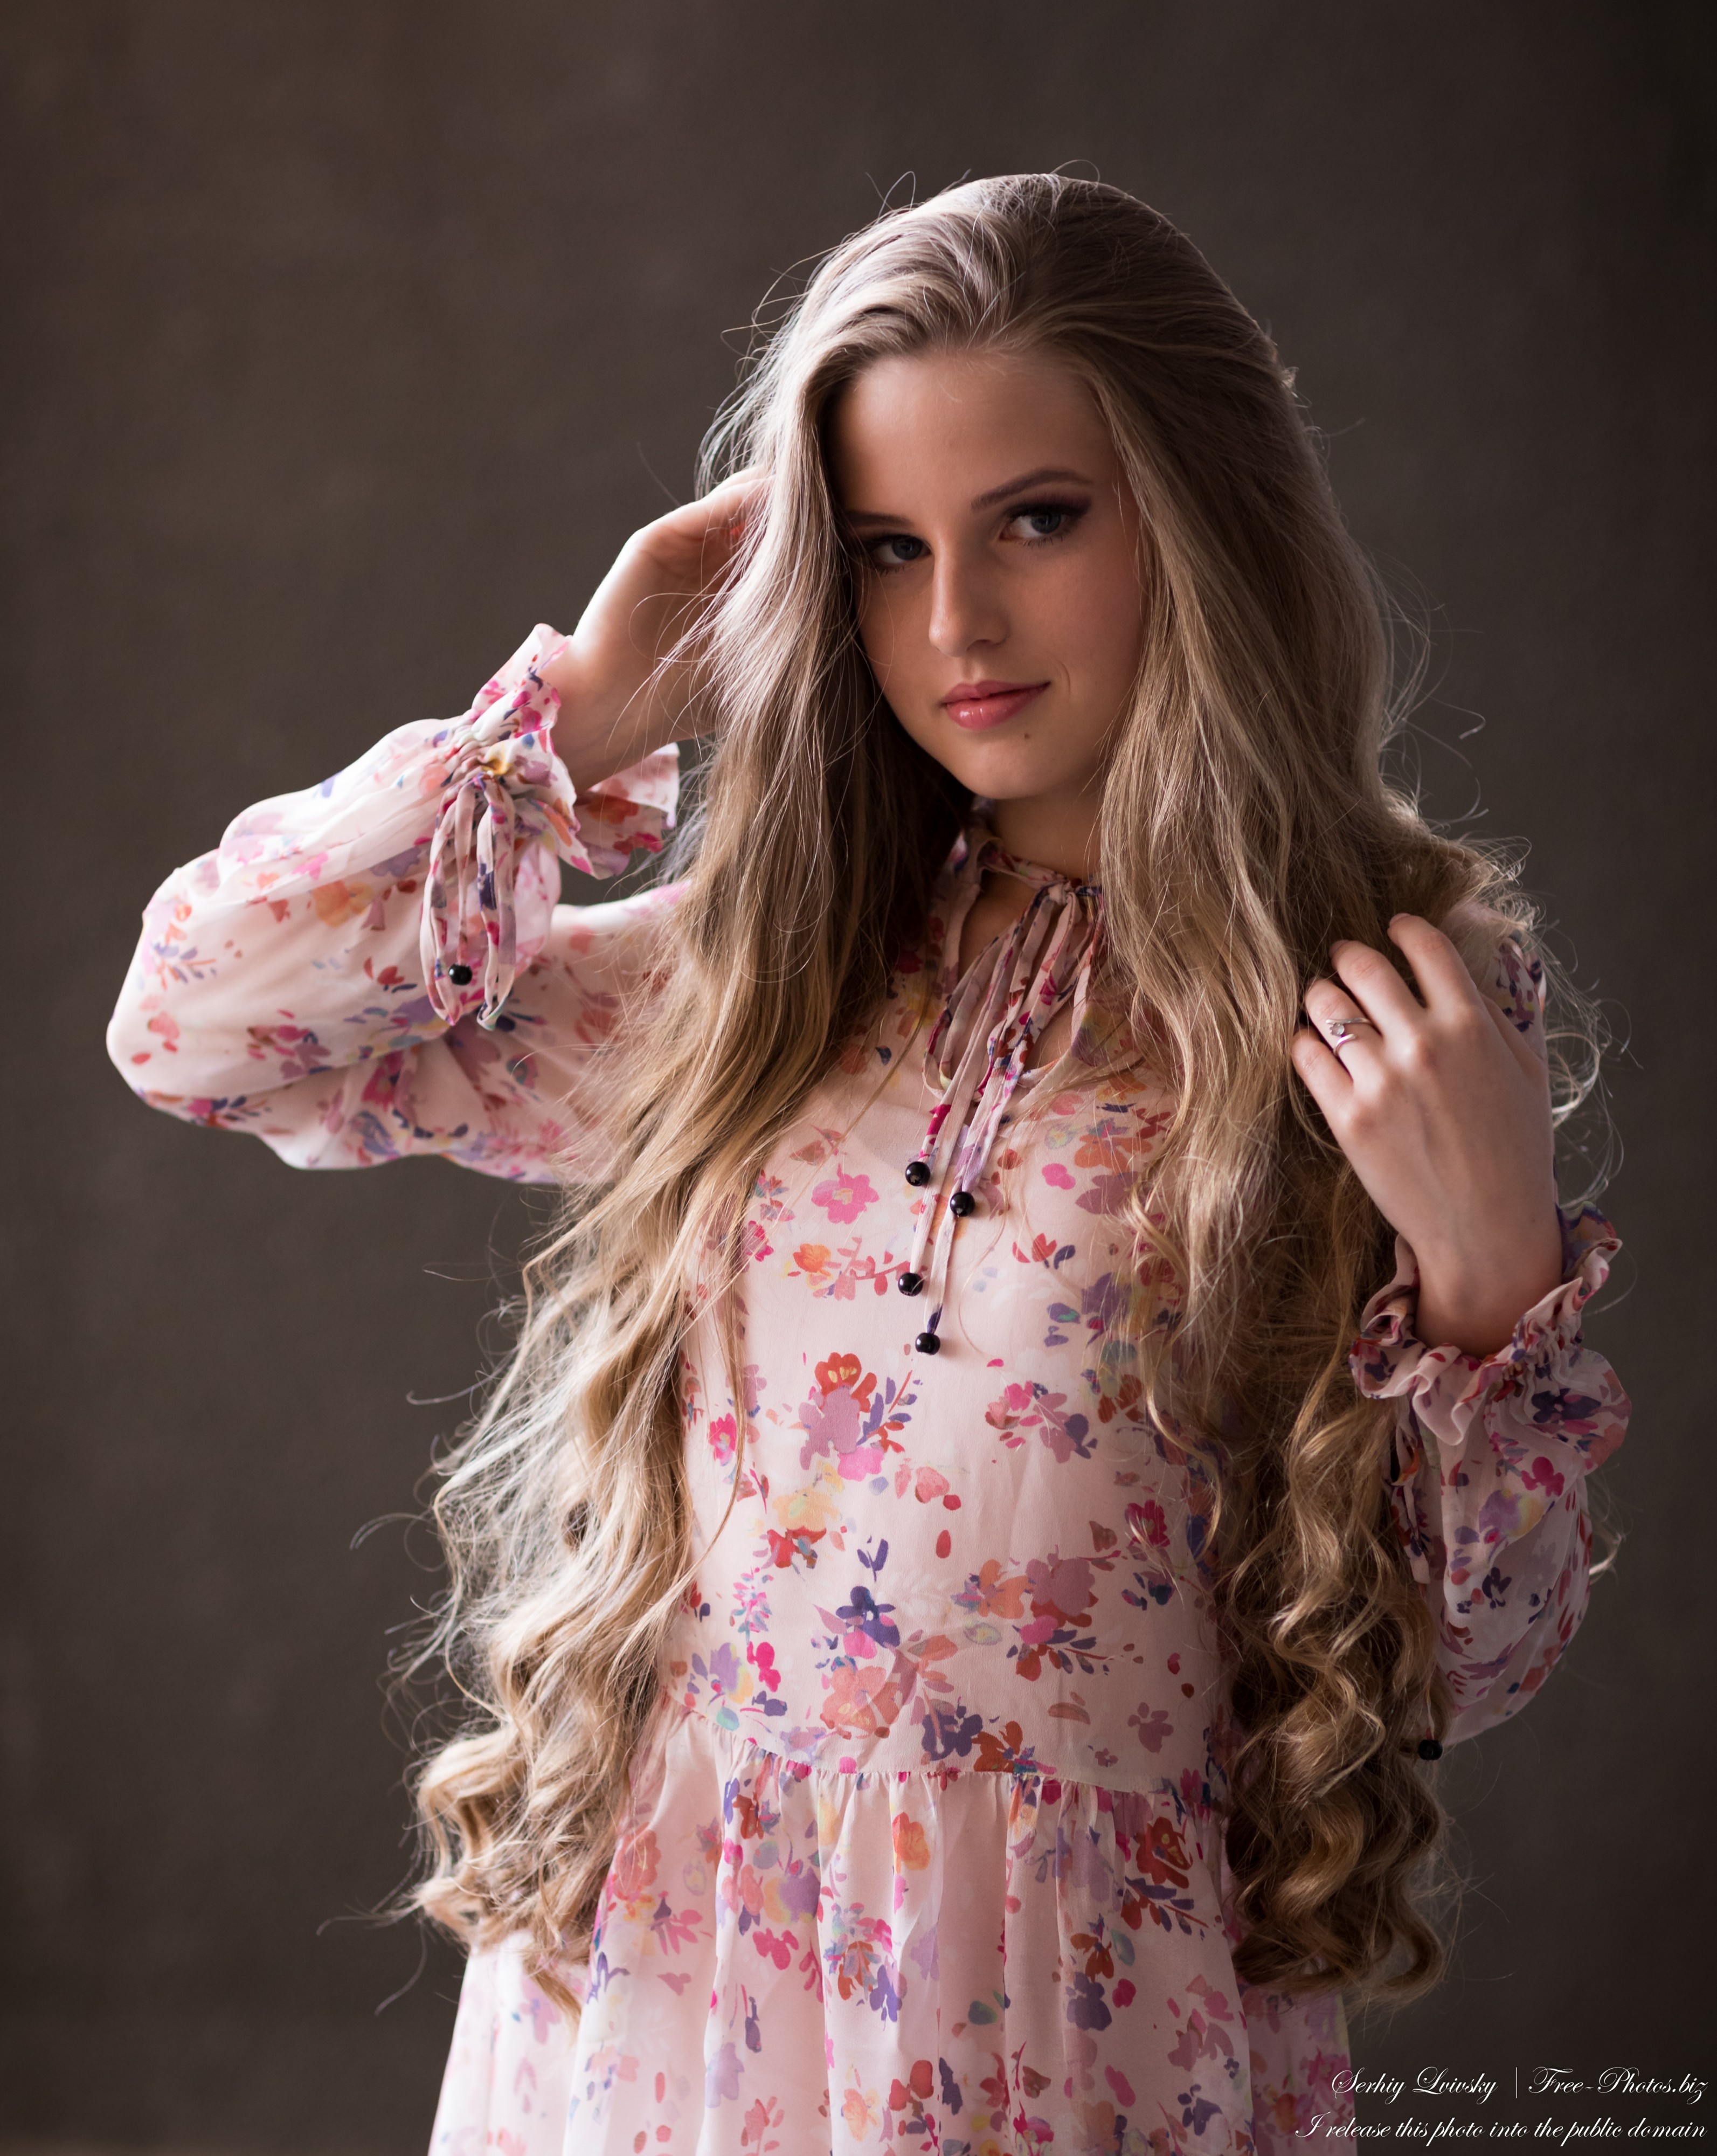 Photo Of Diana An 18 Year Old Natural Blonde Girl Photographed By